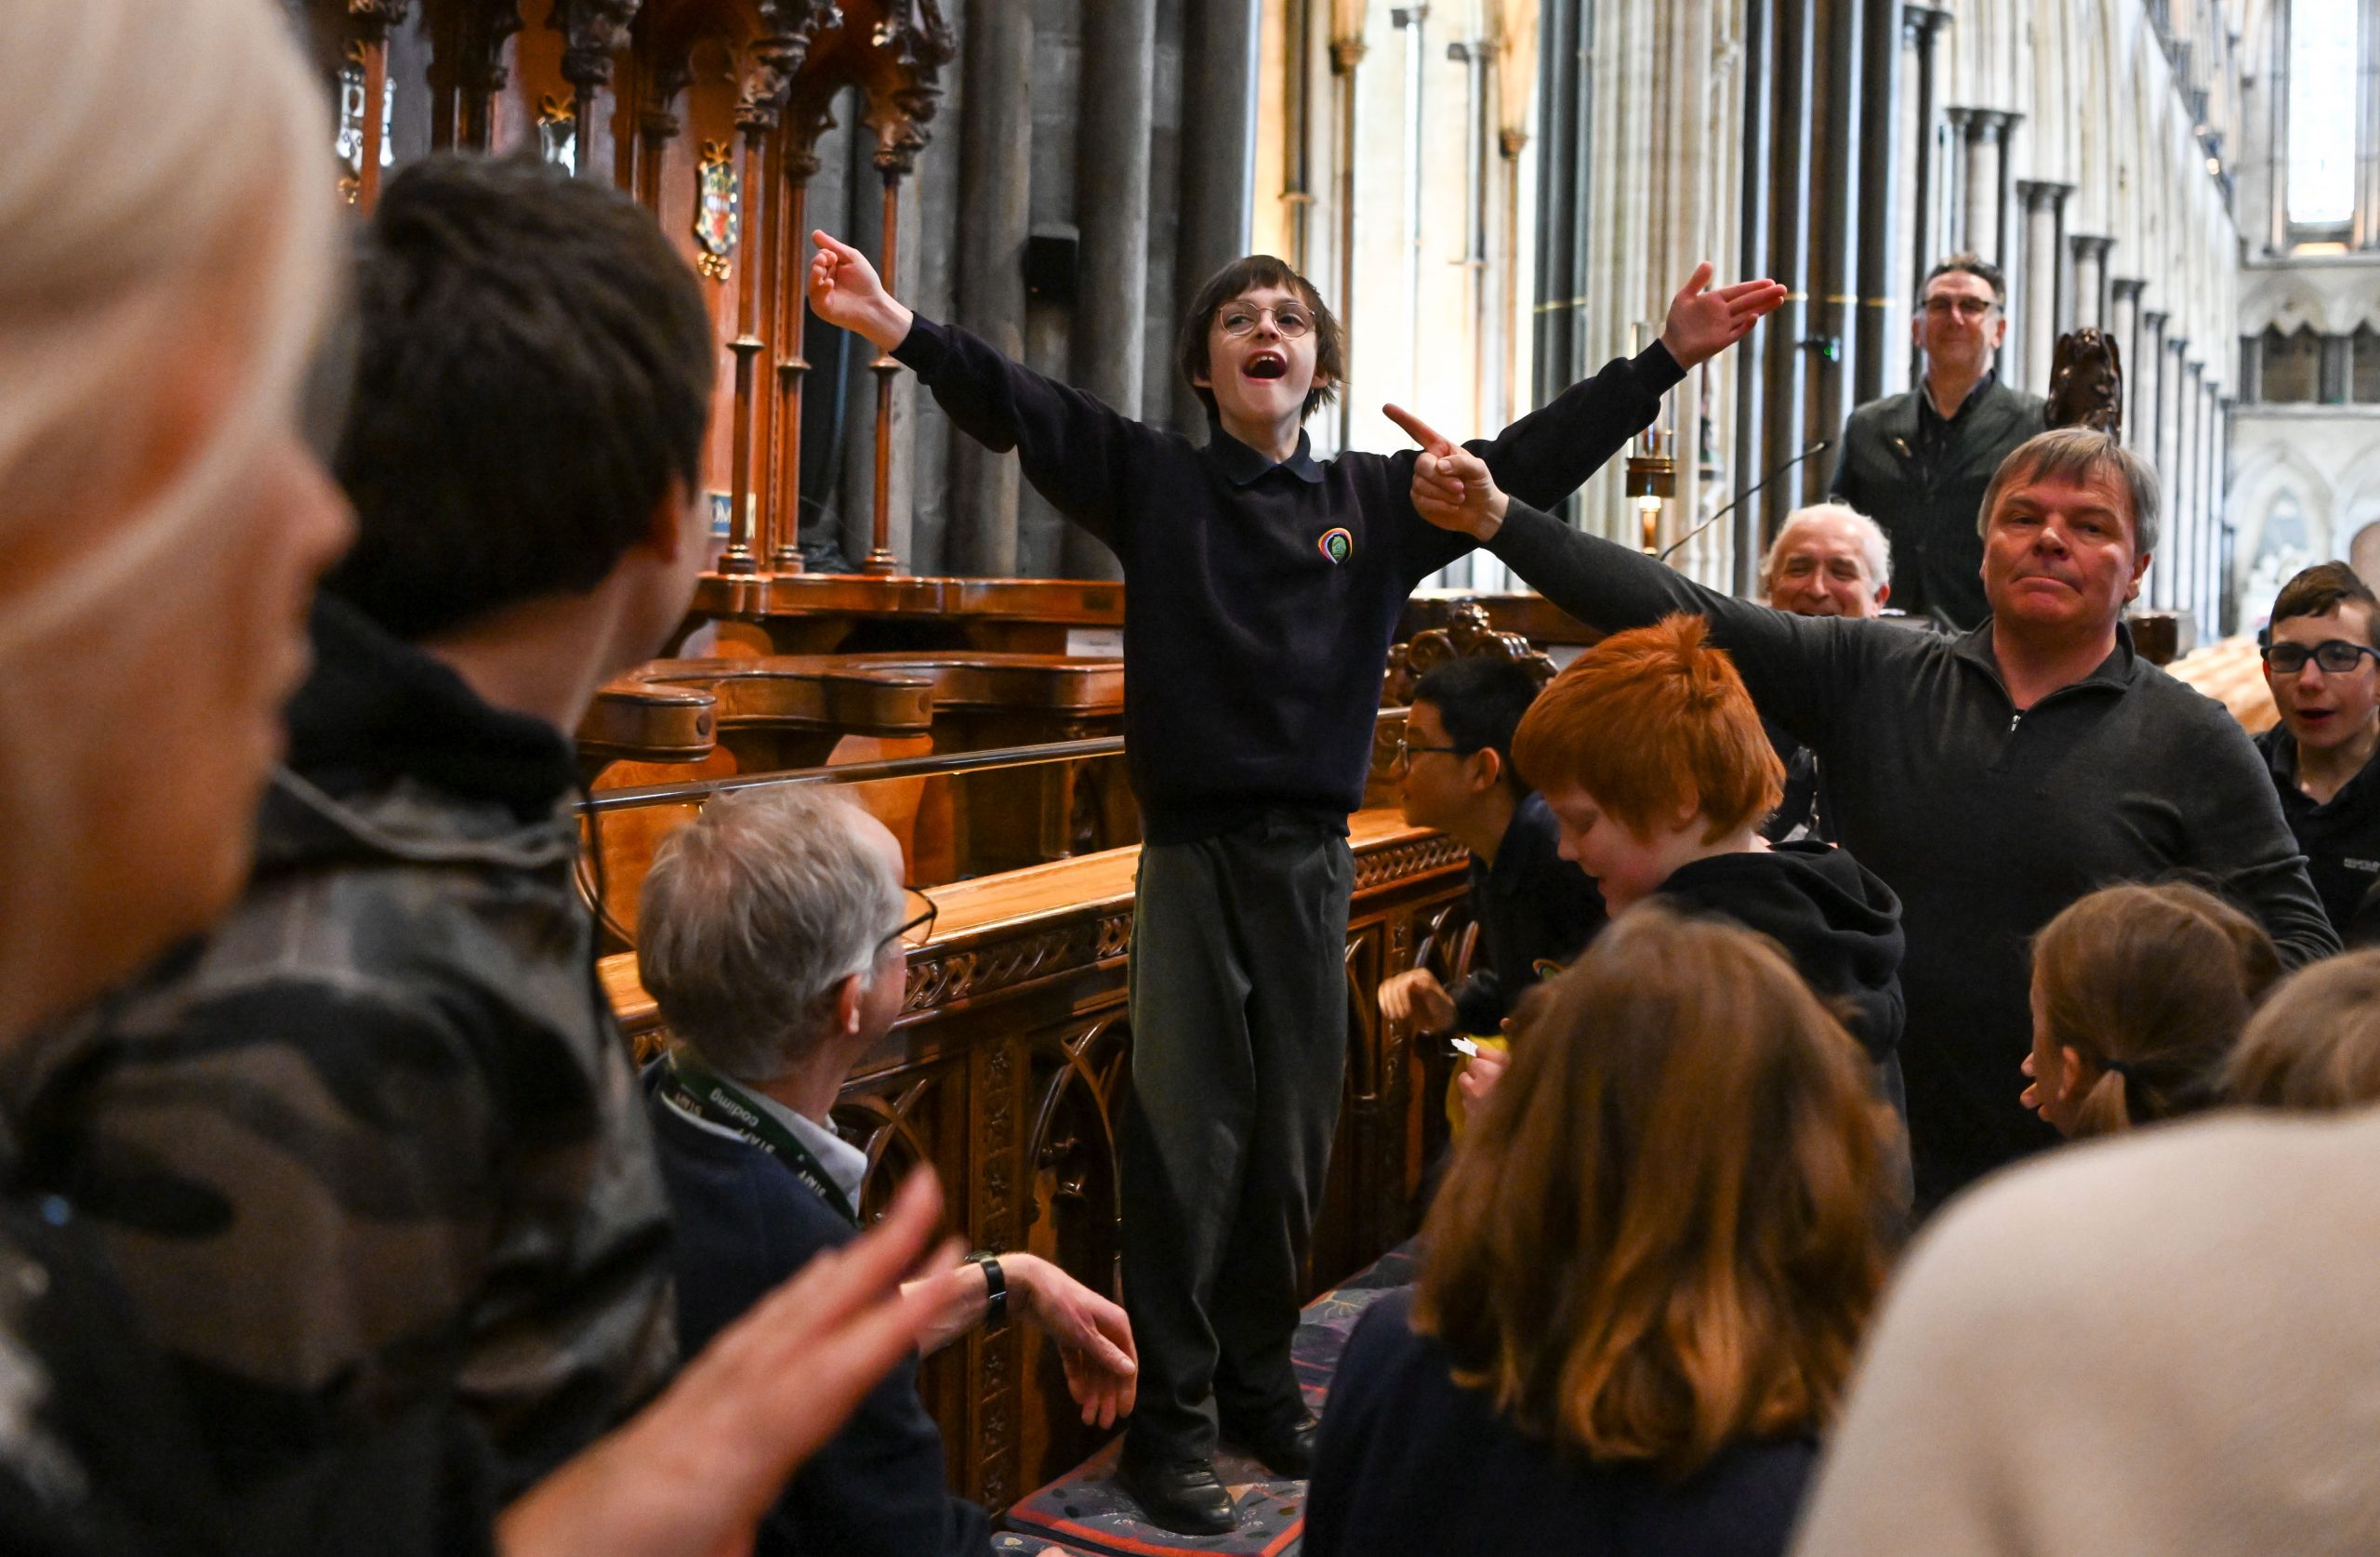 A person standing up in the Cathedral choir surrounded by people